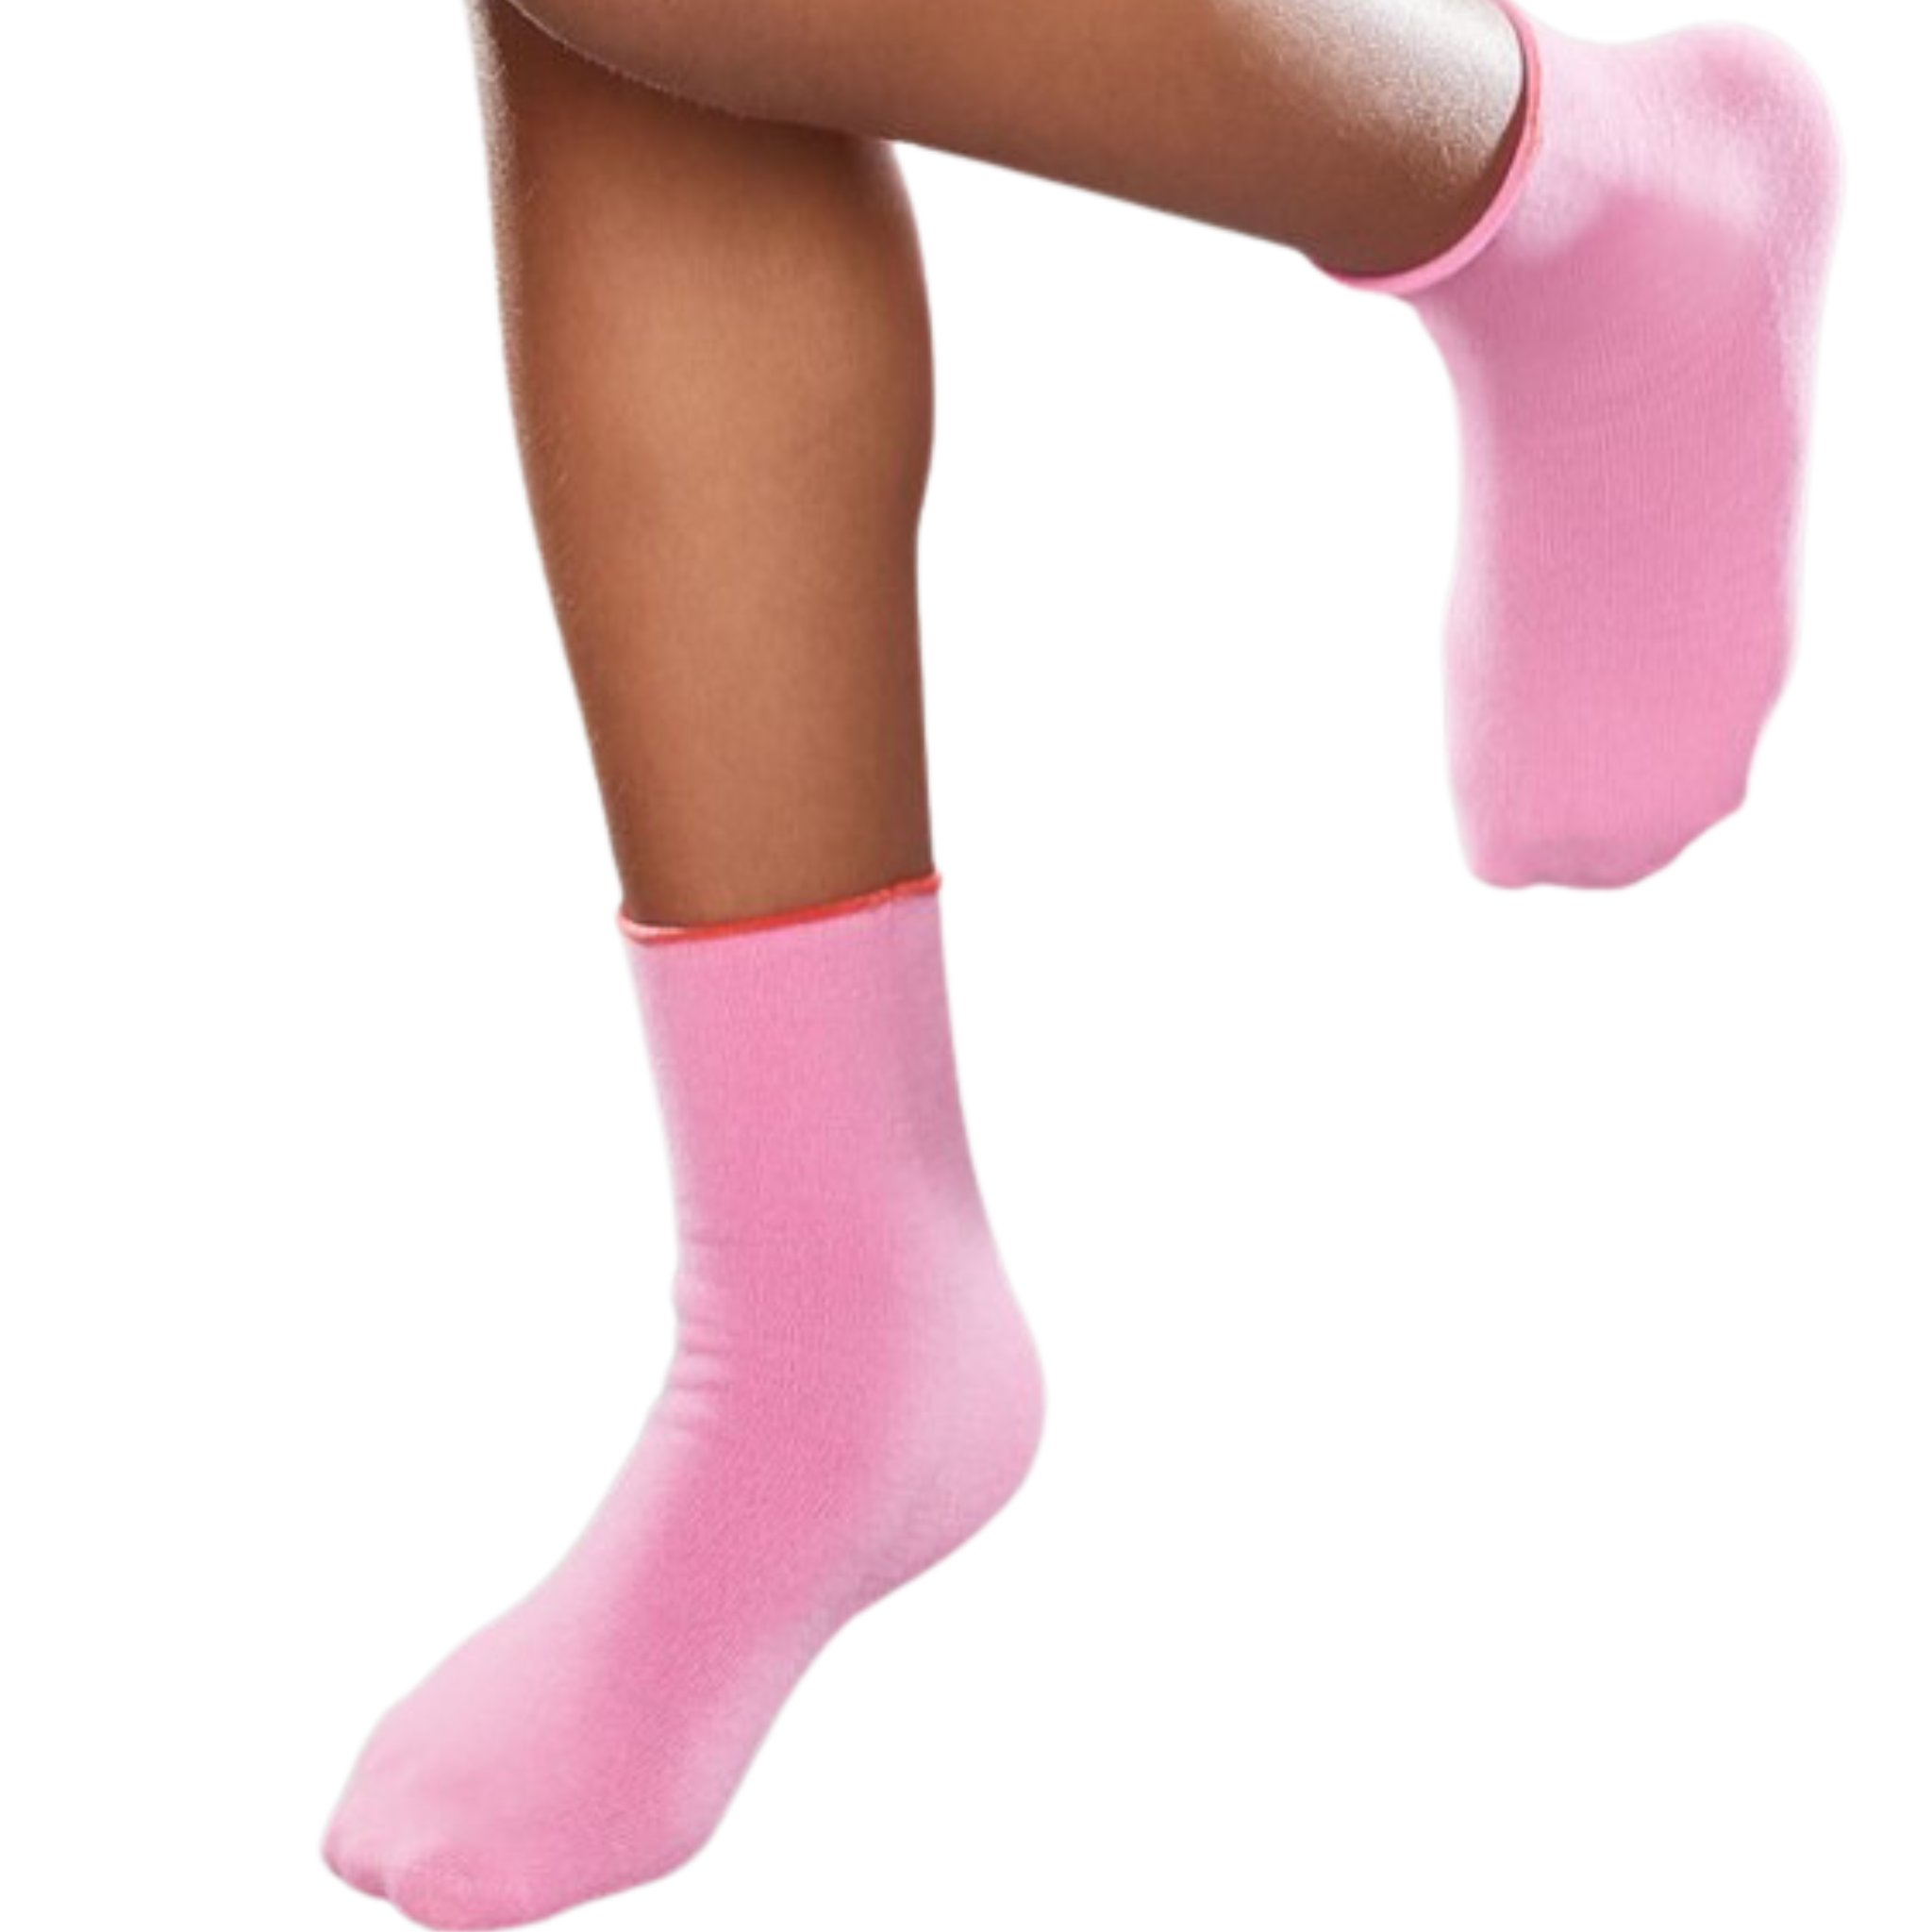 SmartKnitKIDS - Absolutely Seamless Socks - Ultimate comfort sock (6-pack)